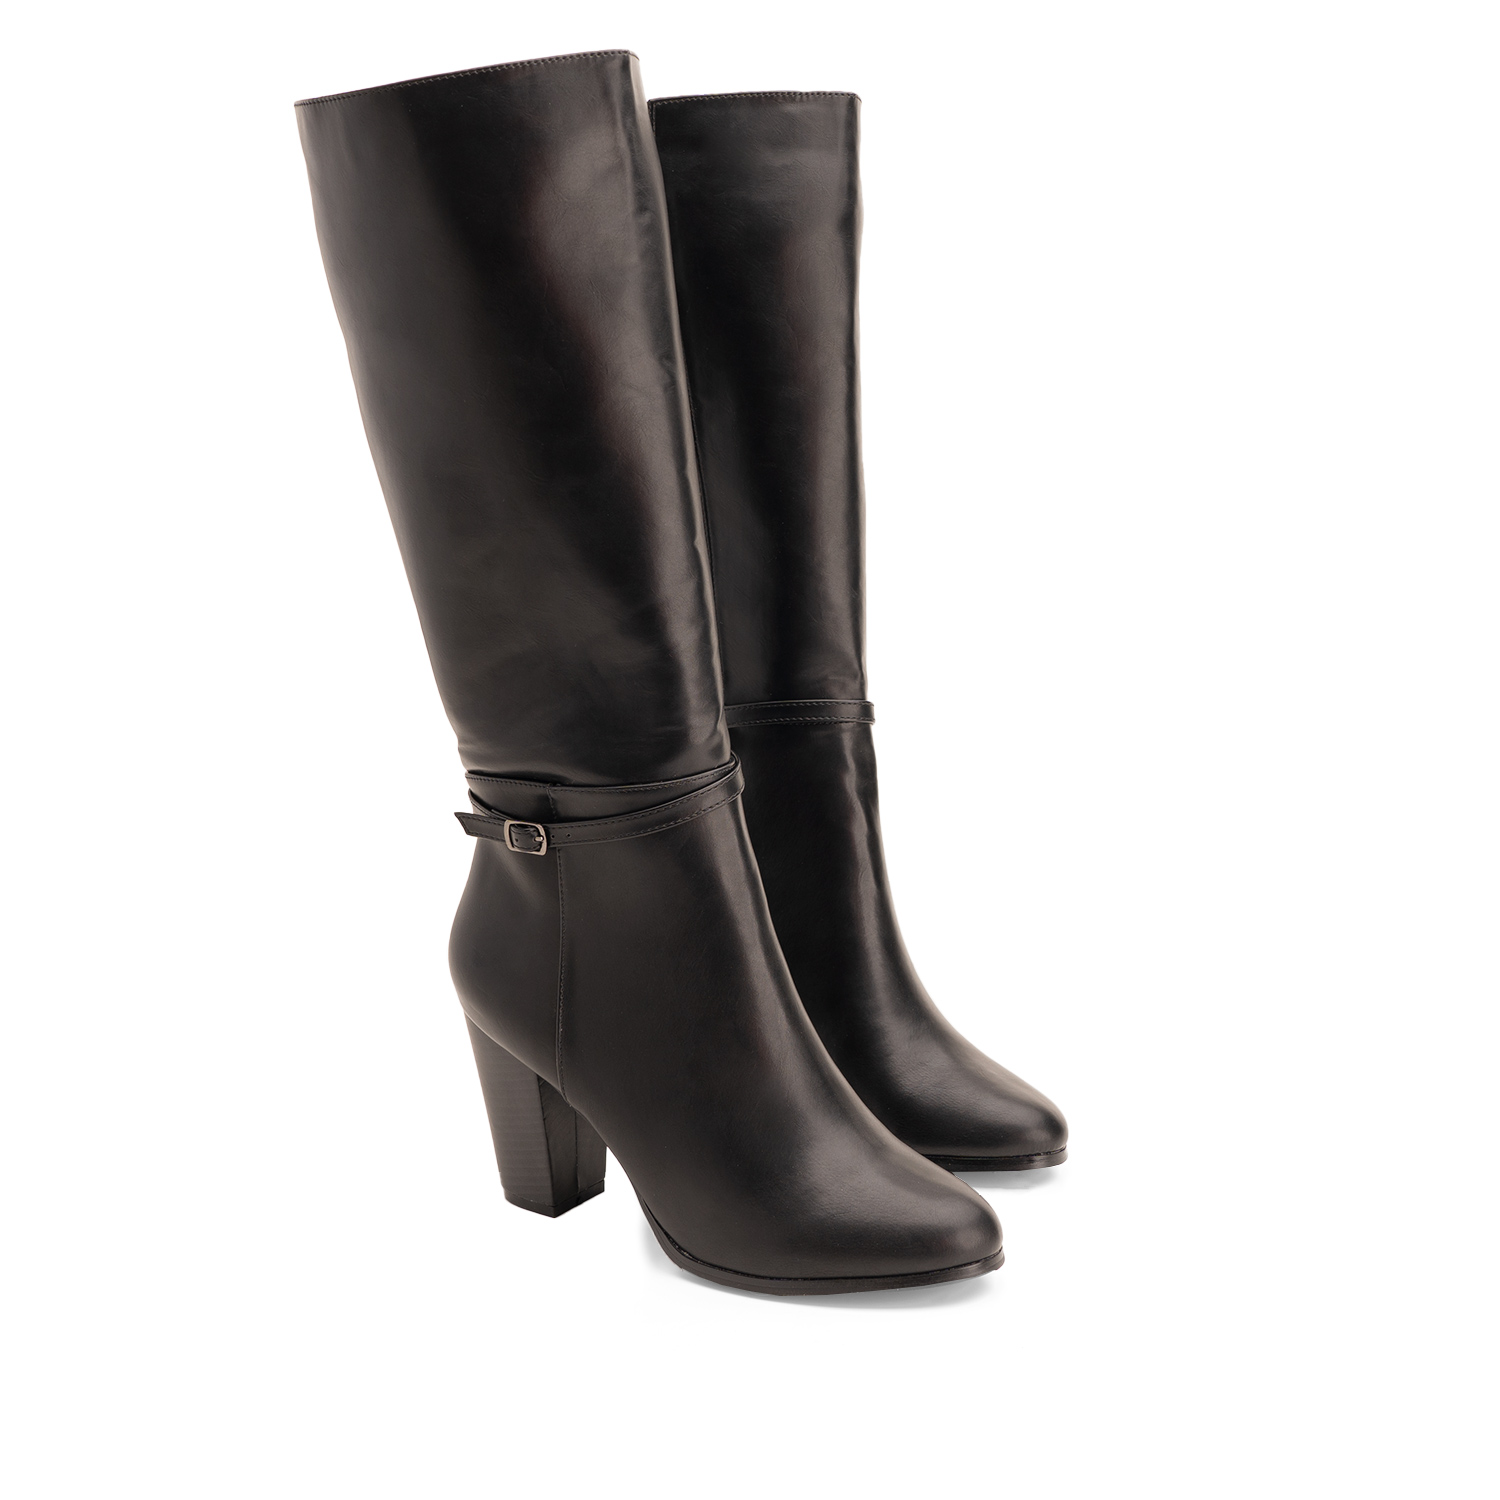 Heeled boots in black faux leather with buckled strap detail 